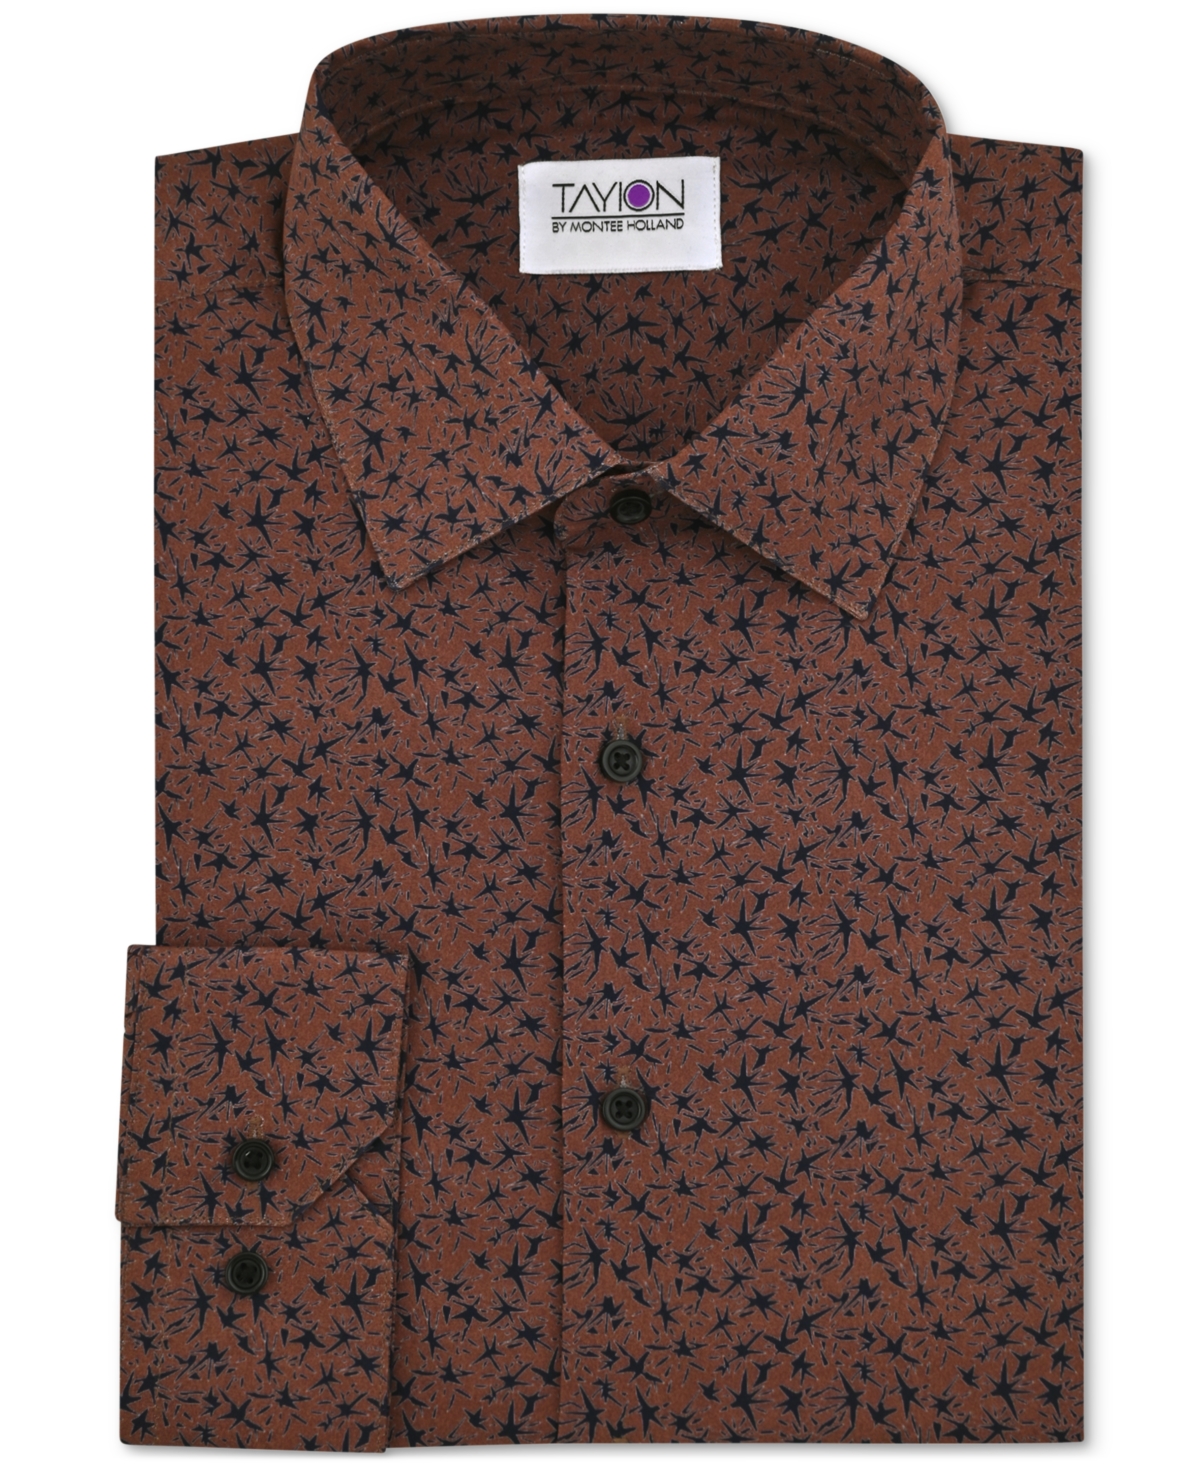 Tayion Collection Men's Slim-fit Mini-floral Dress Shirt In Brown